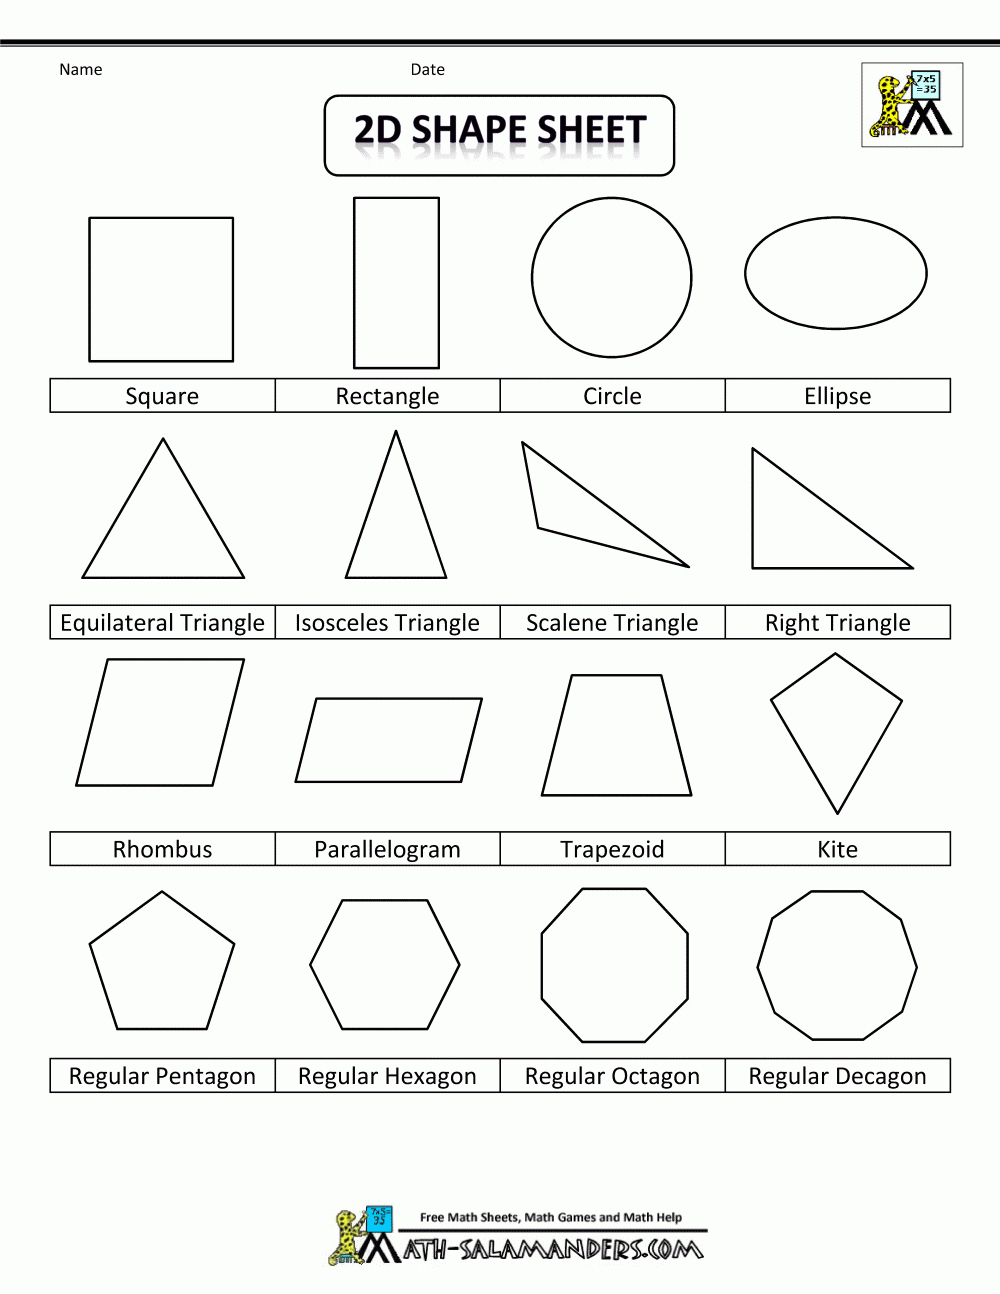 Printable Shapes 2D And 3D - Free Shape Templates Printable